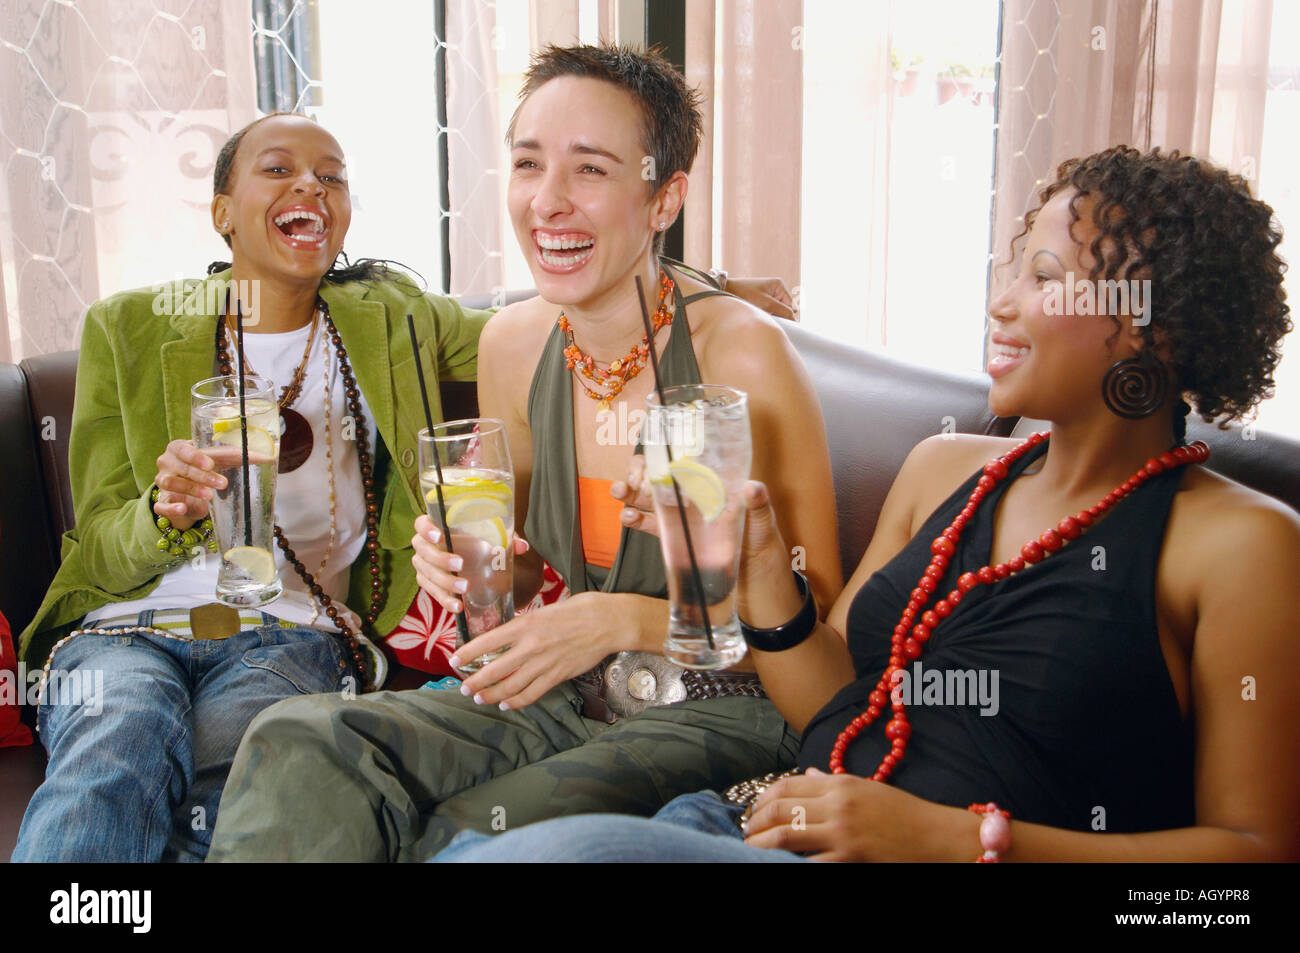 Three women laughing and drinking on sofa Stock Photo